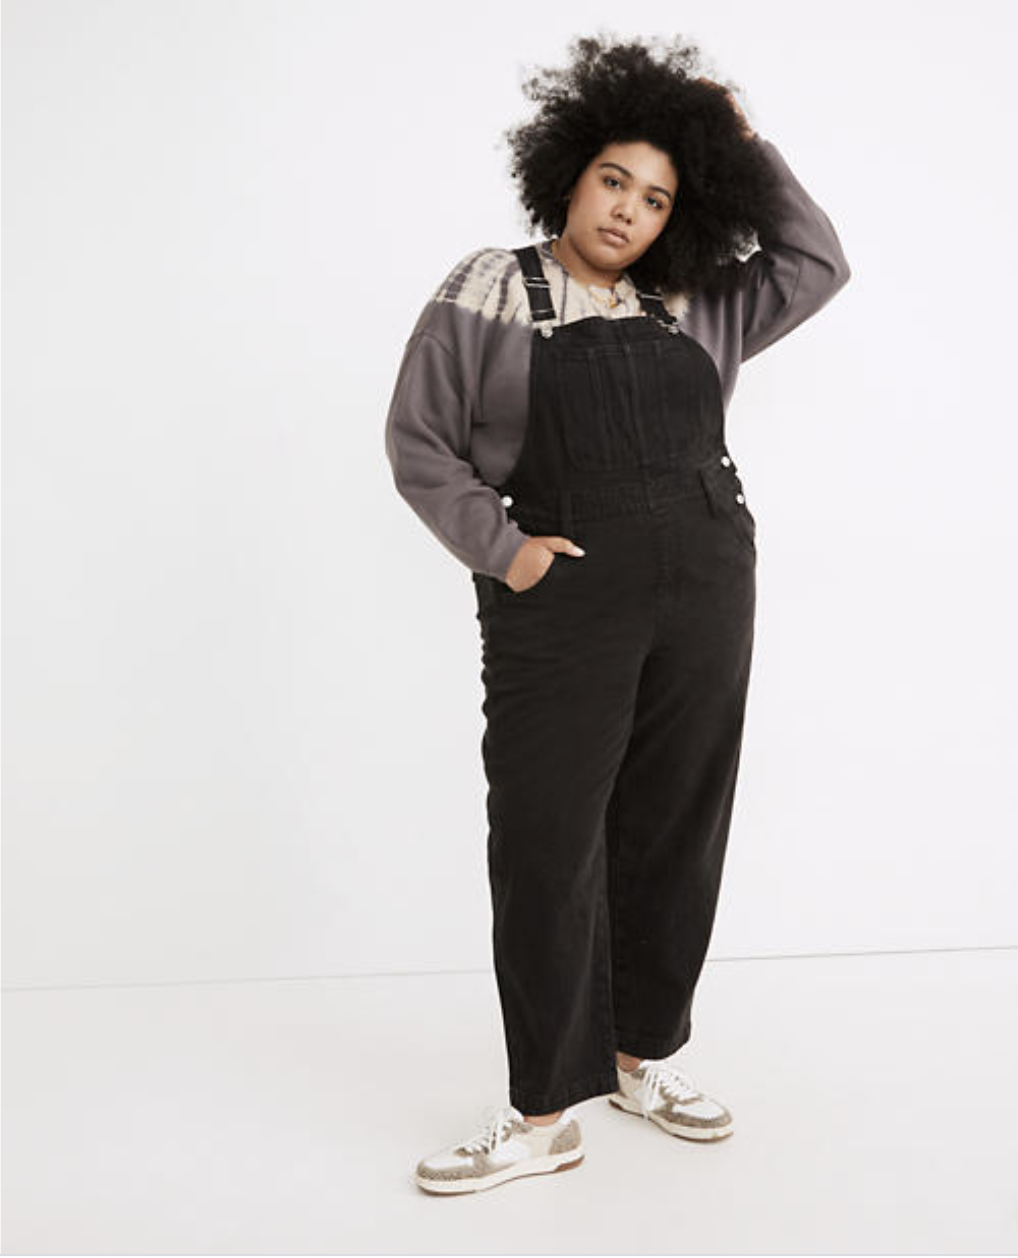 Model in a pair of black overalls